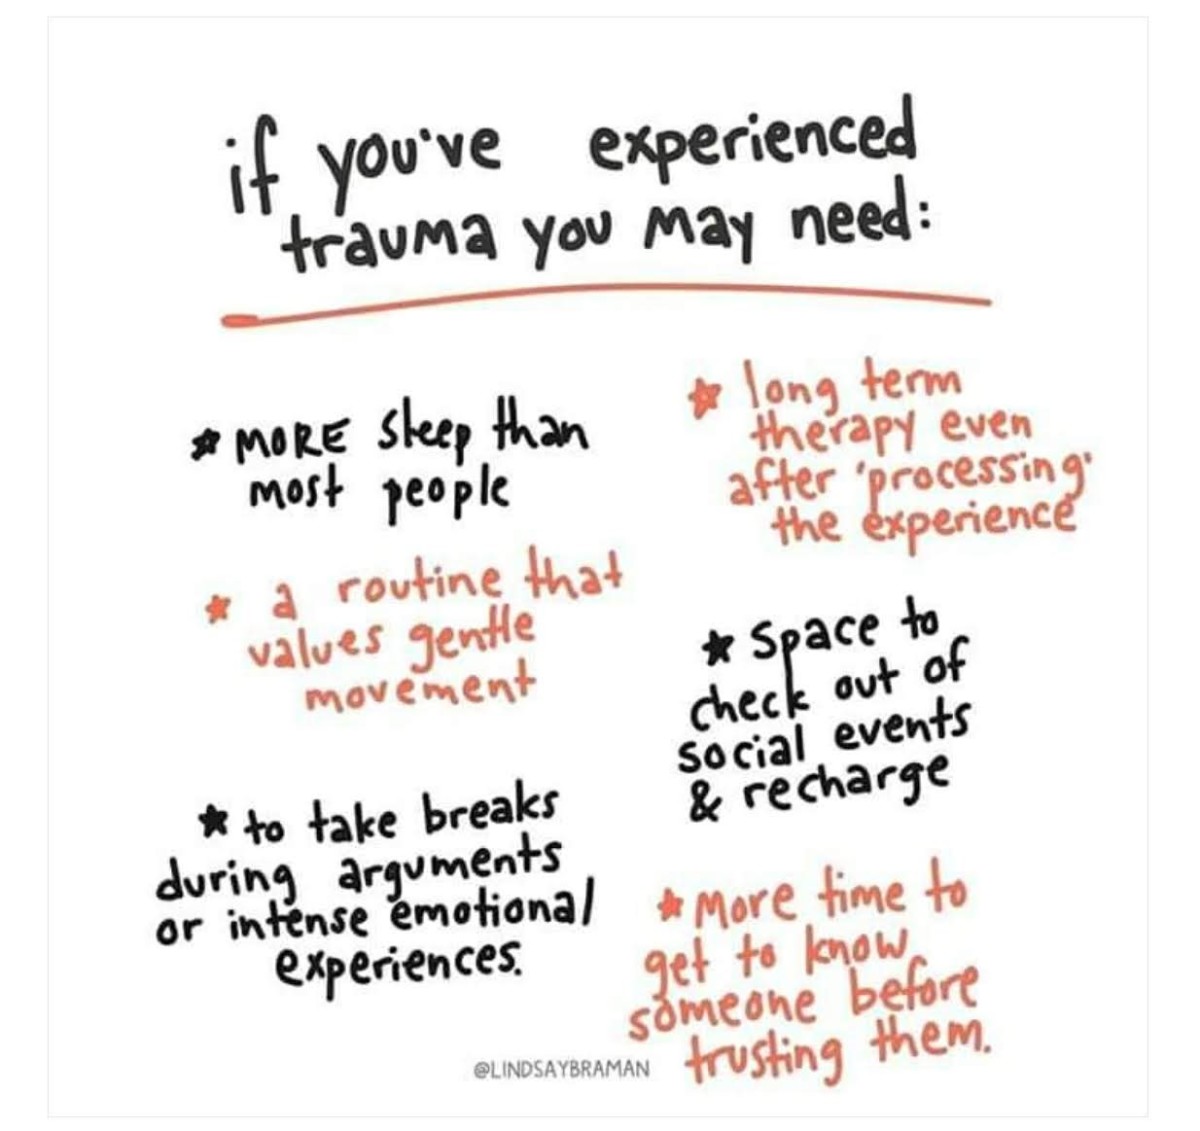 Trauma inhibits our ability to process life. Trauma body holding patterns can be lifted and healed, though rebuilding may seem like an almost invisible process made up of constant struggles. With struggle comes strength.